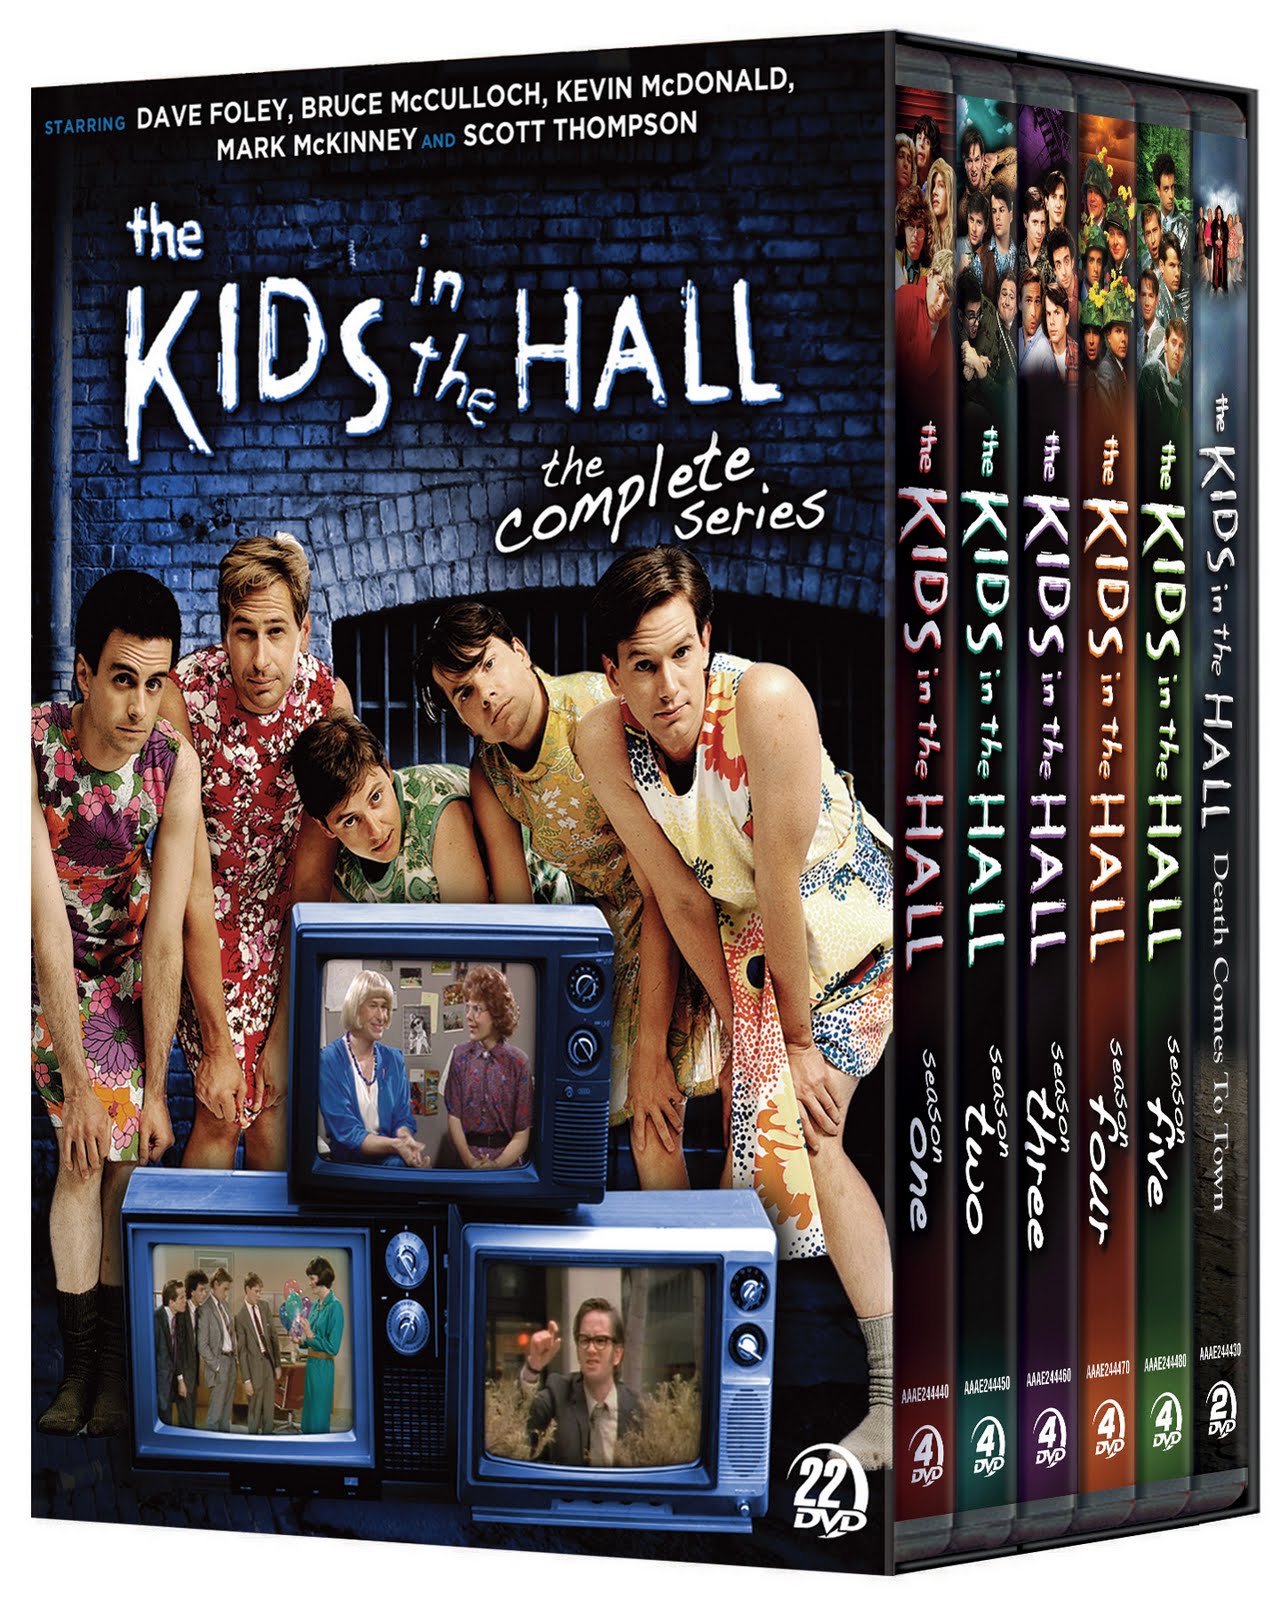 Blu-ray Journal: The Kids in the Hall: Complete Series Megaset - DVD Review